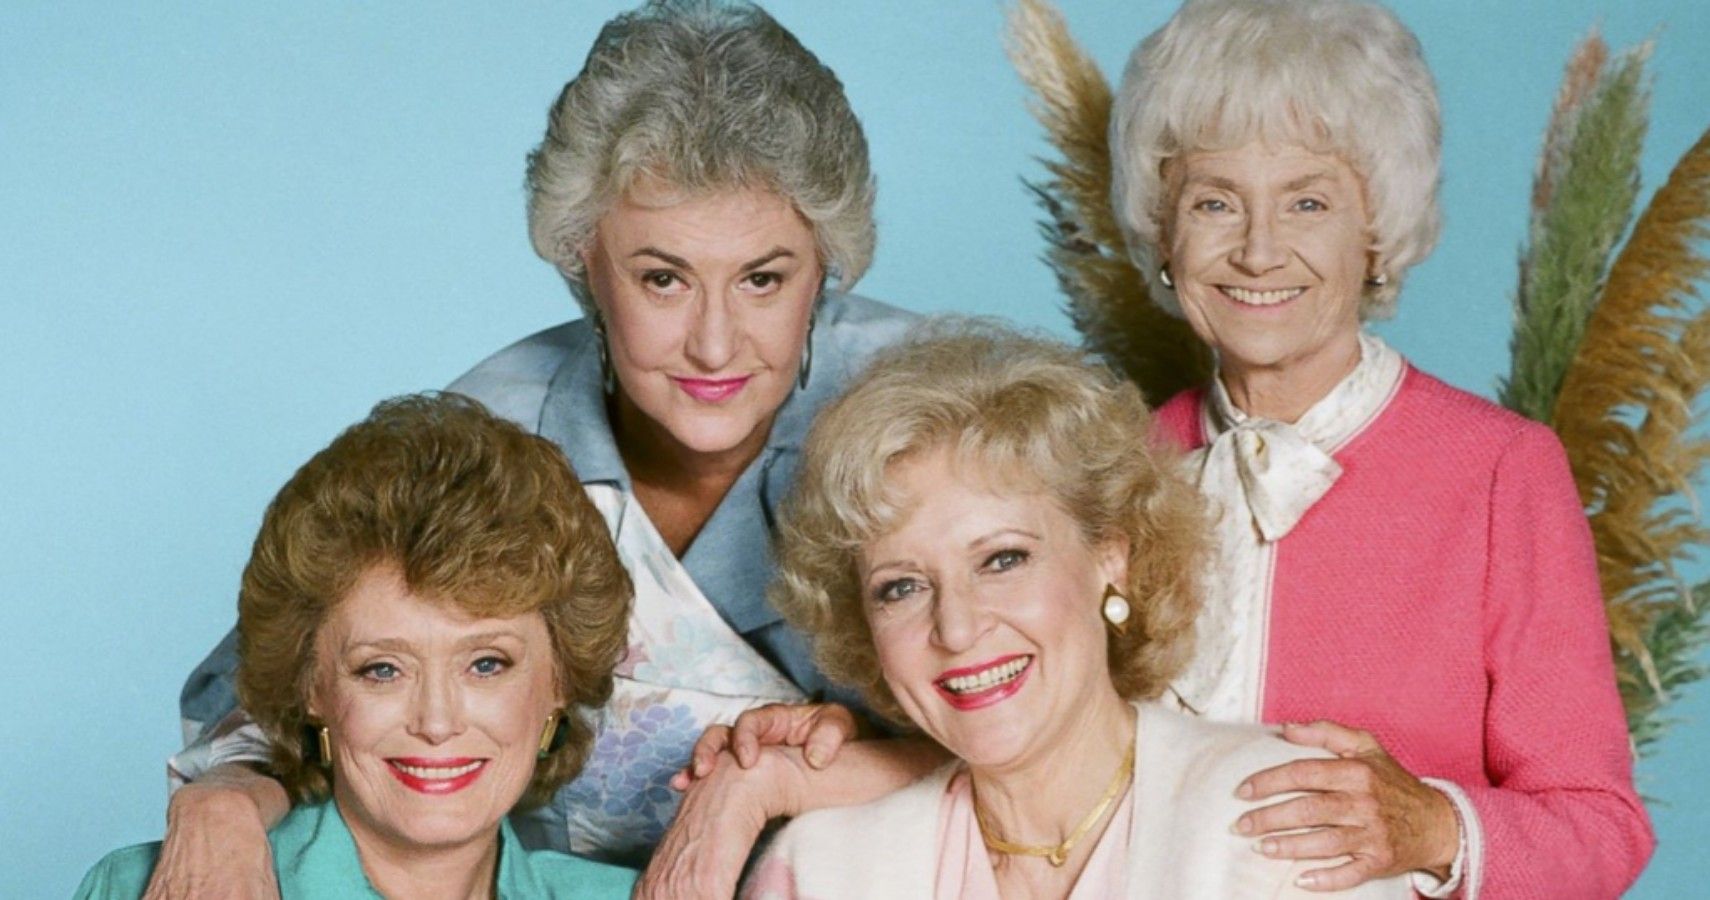 The Golden Girls The 5 Best Episodes (& The 5 Worst)